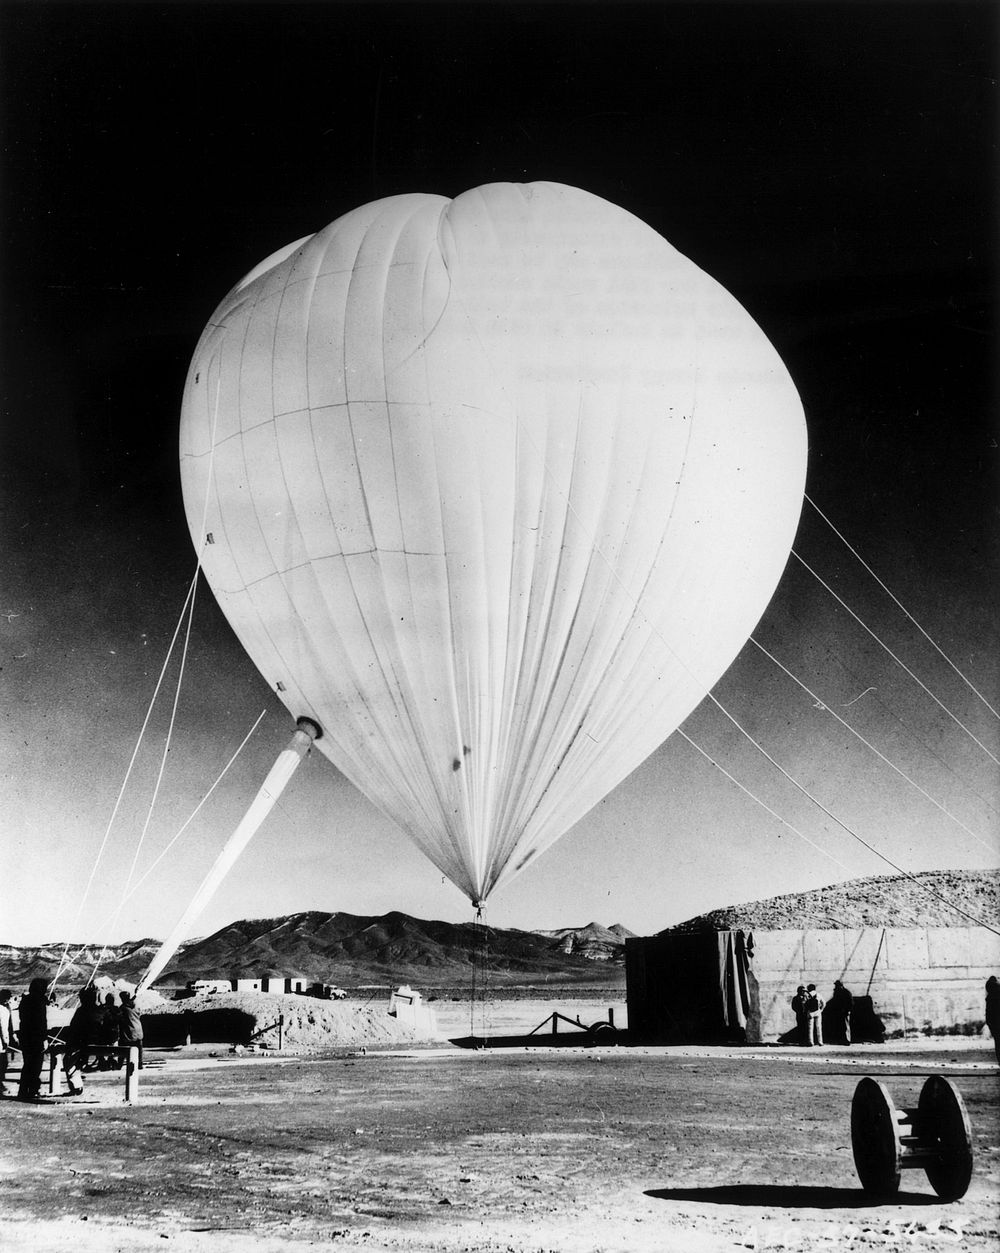 Old photograph of an anchored balloon. Original public domain image from Flickr